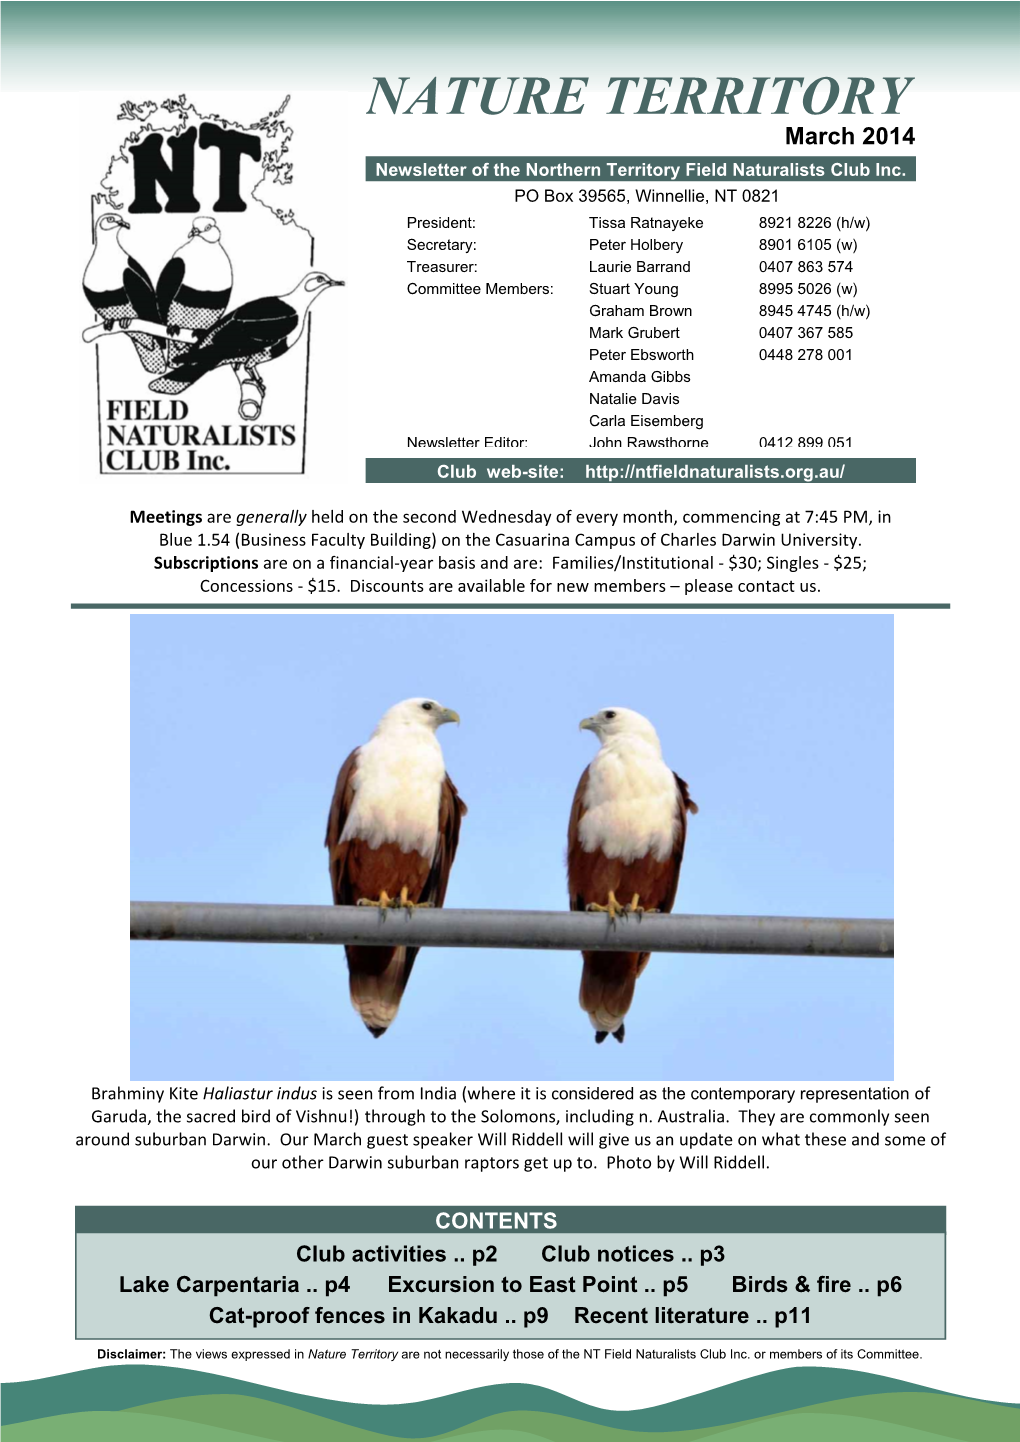 March 2014 Newsletter of the Northern Territory Field Naturalists Club Inc